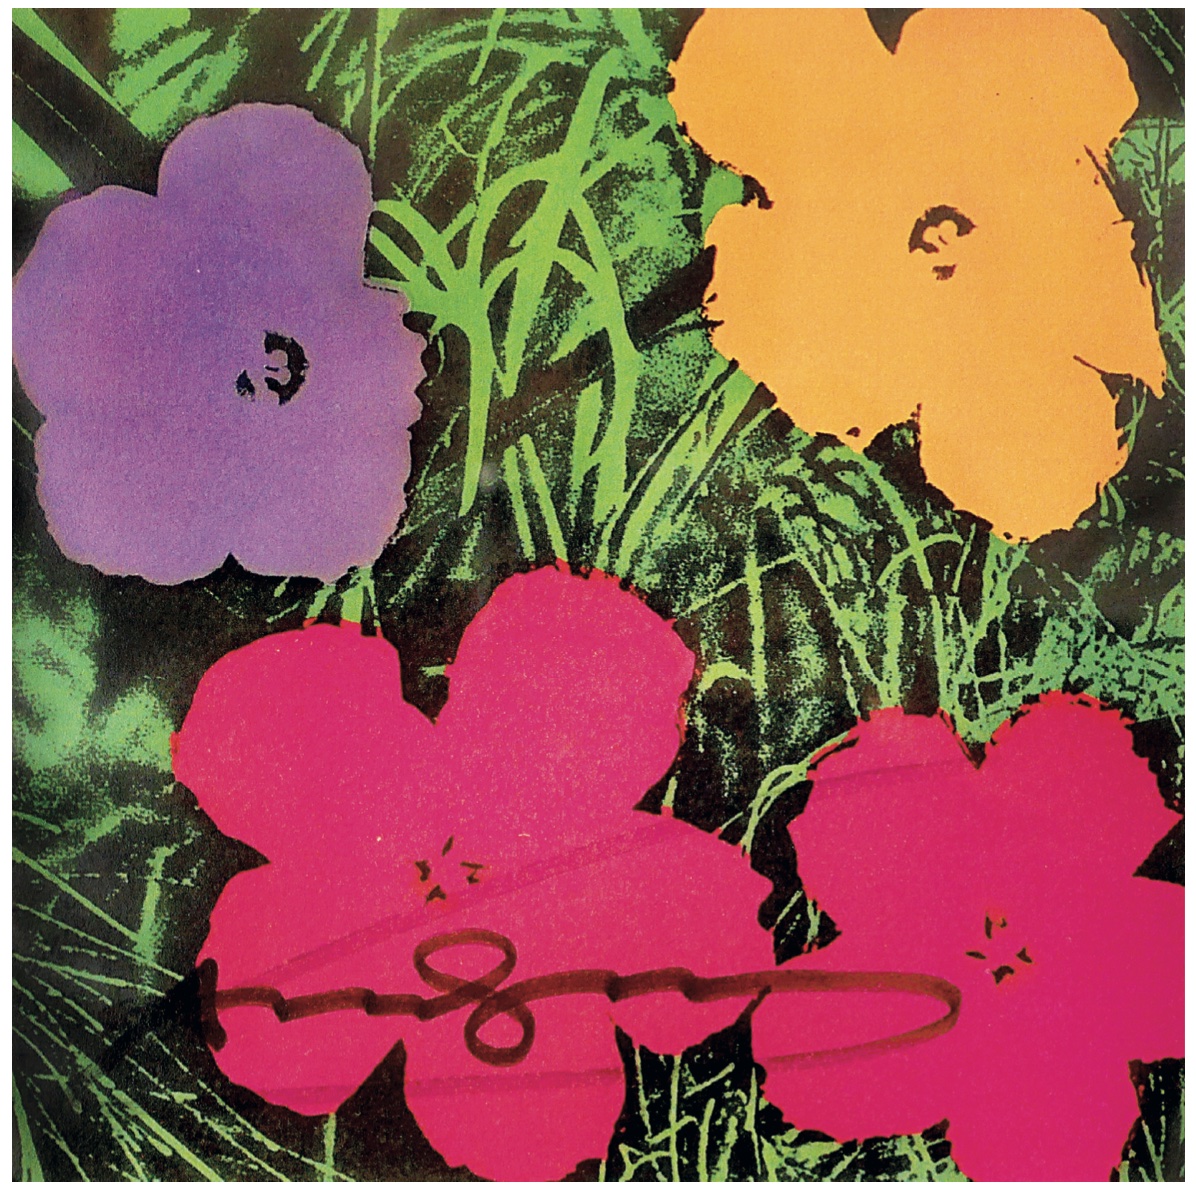 ANDY WARHOL / „FLOWERS INVITATION“ 1970 / Offset Lithografie